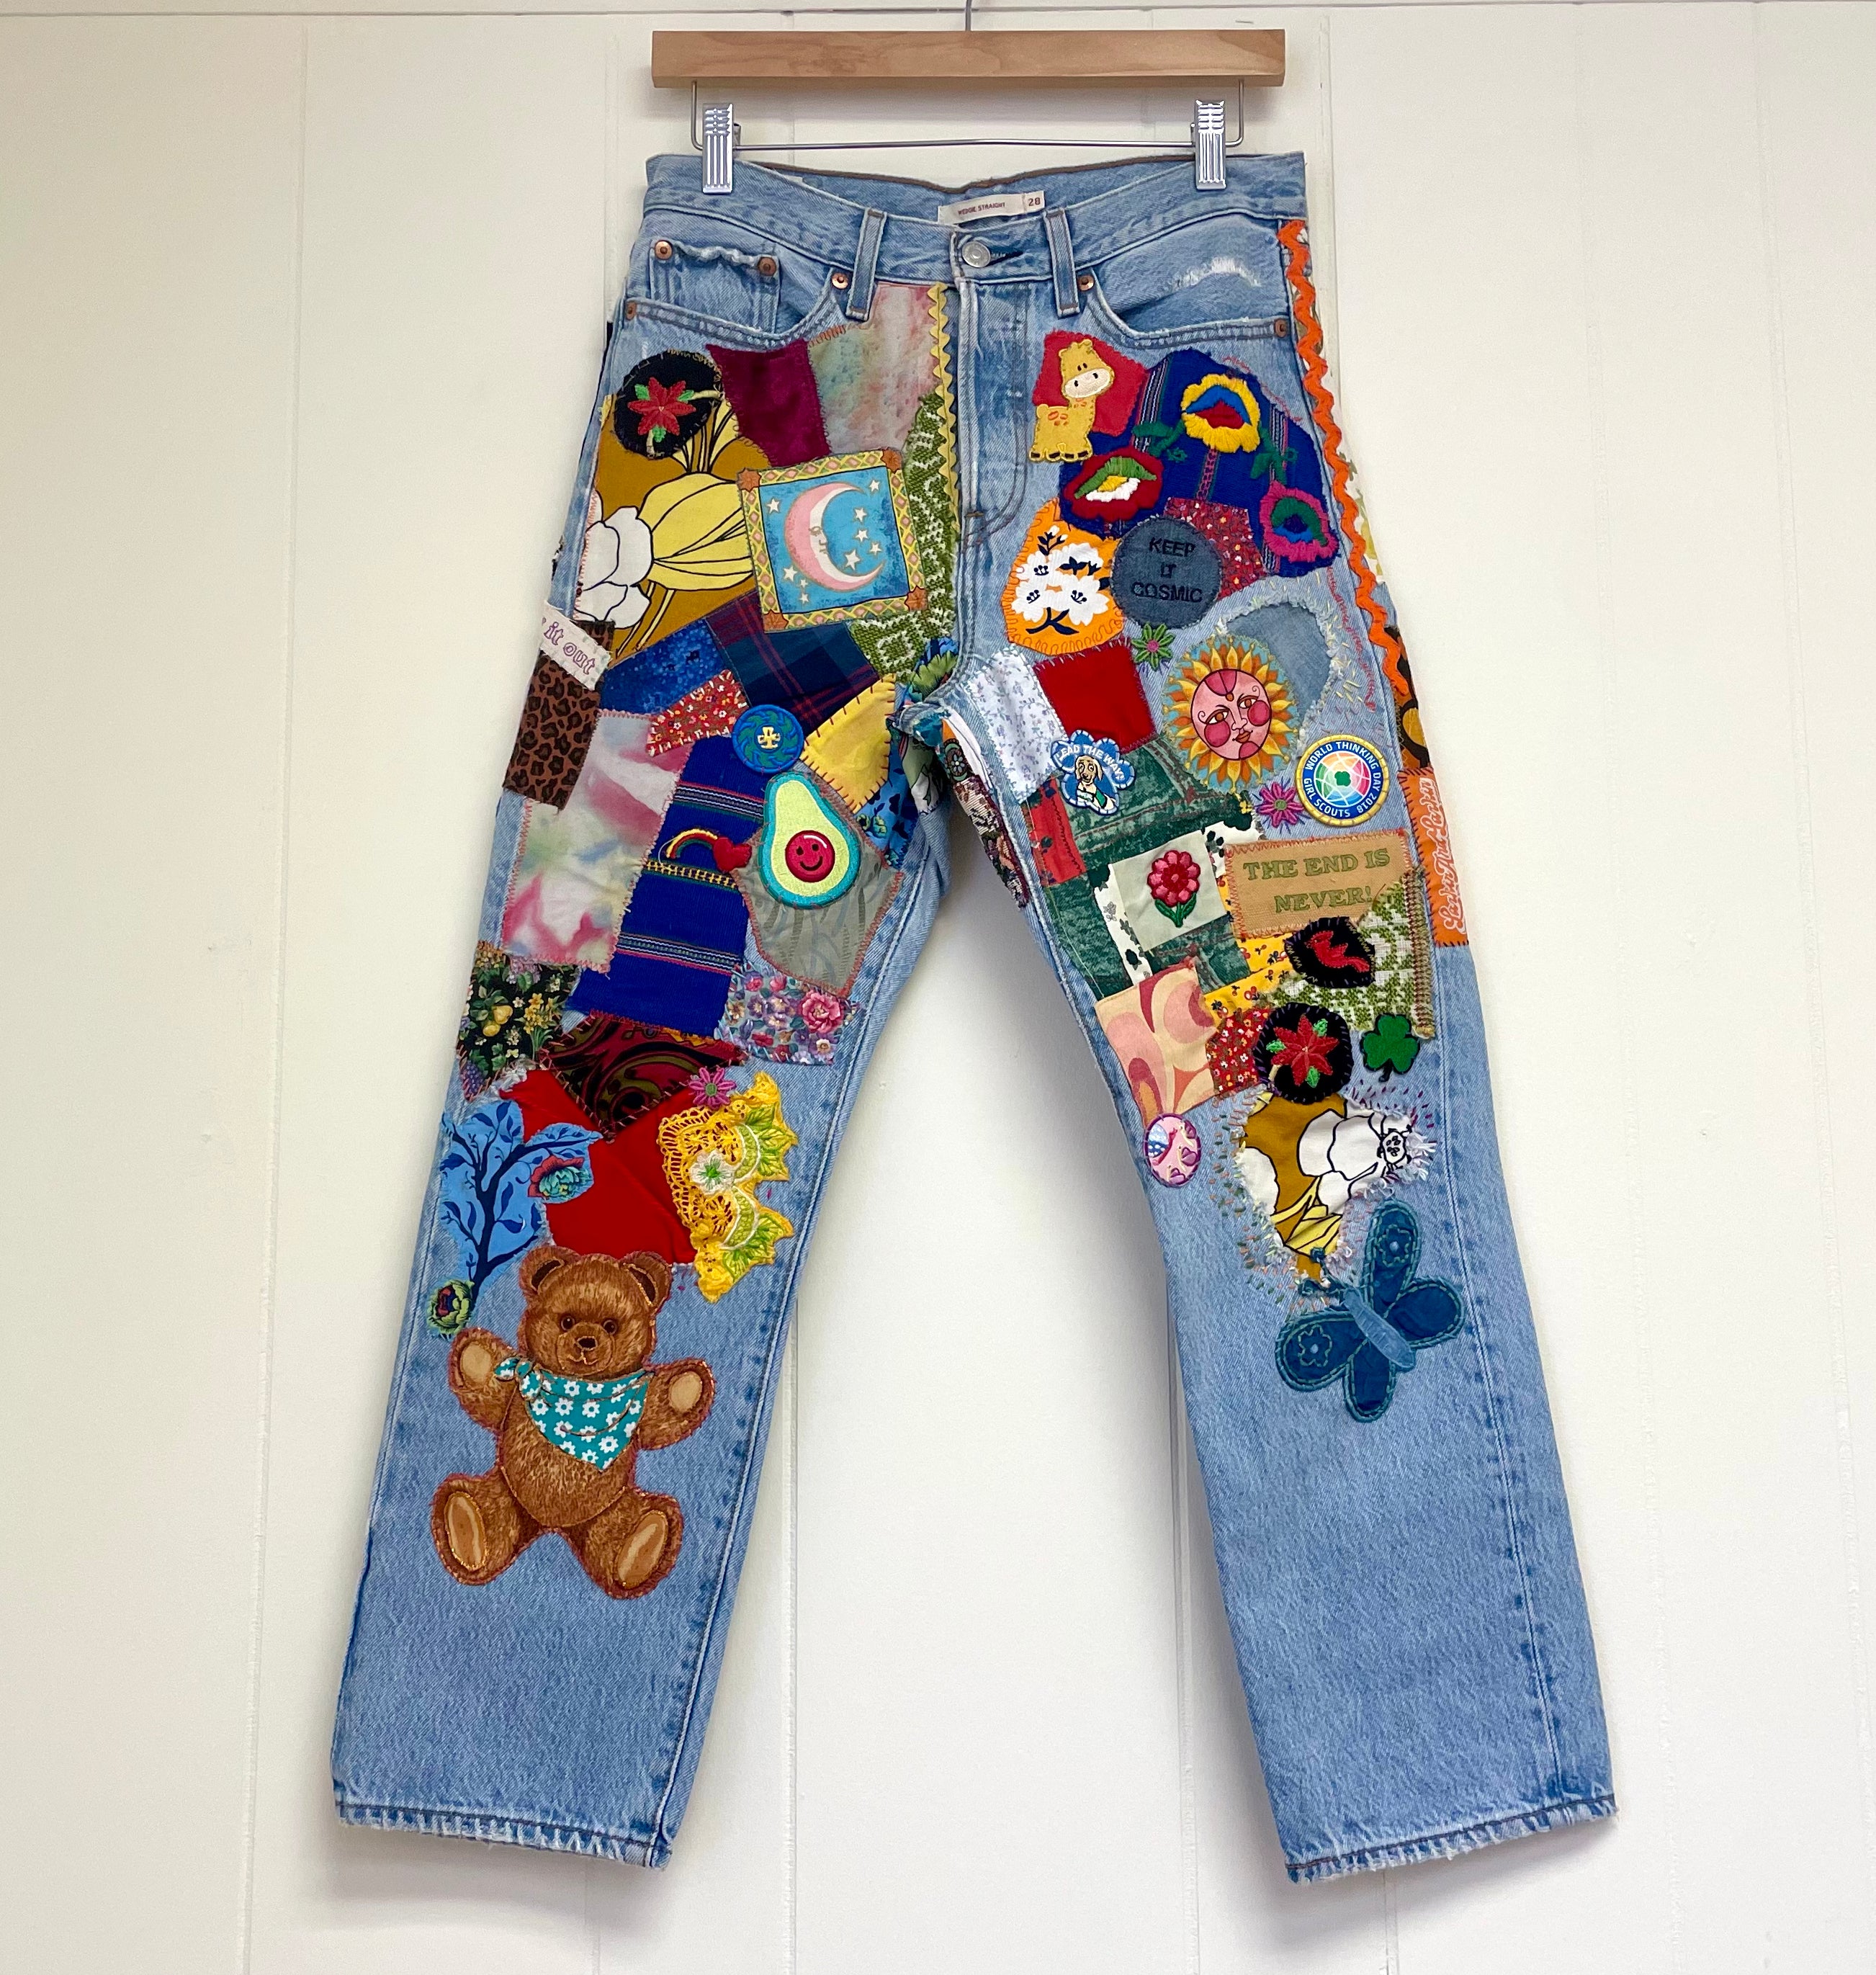 Wearable Art and Embroidered Denim by Larkin and Larkin